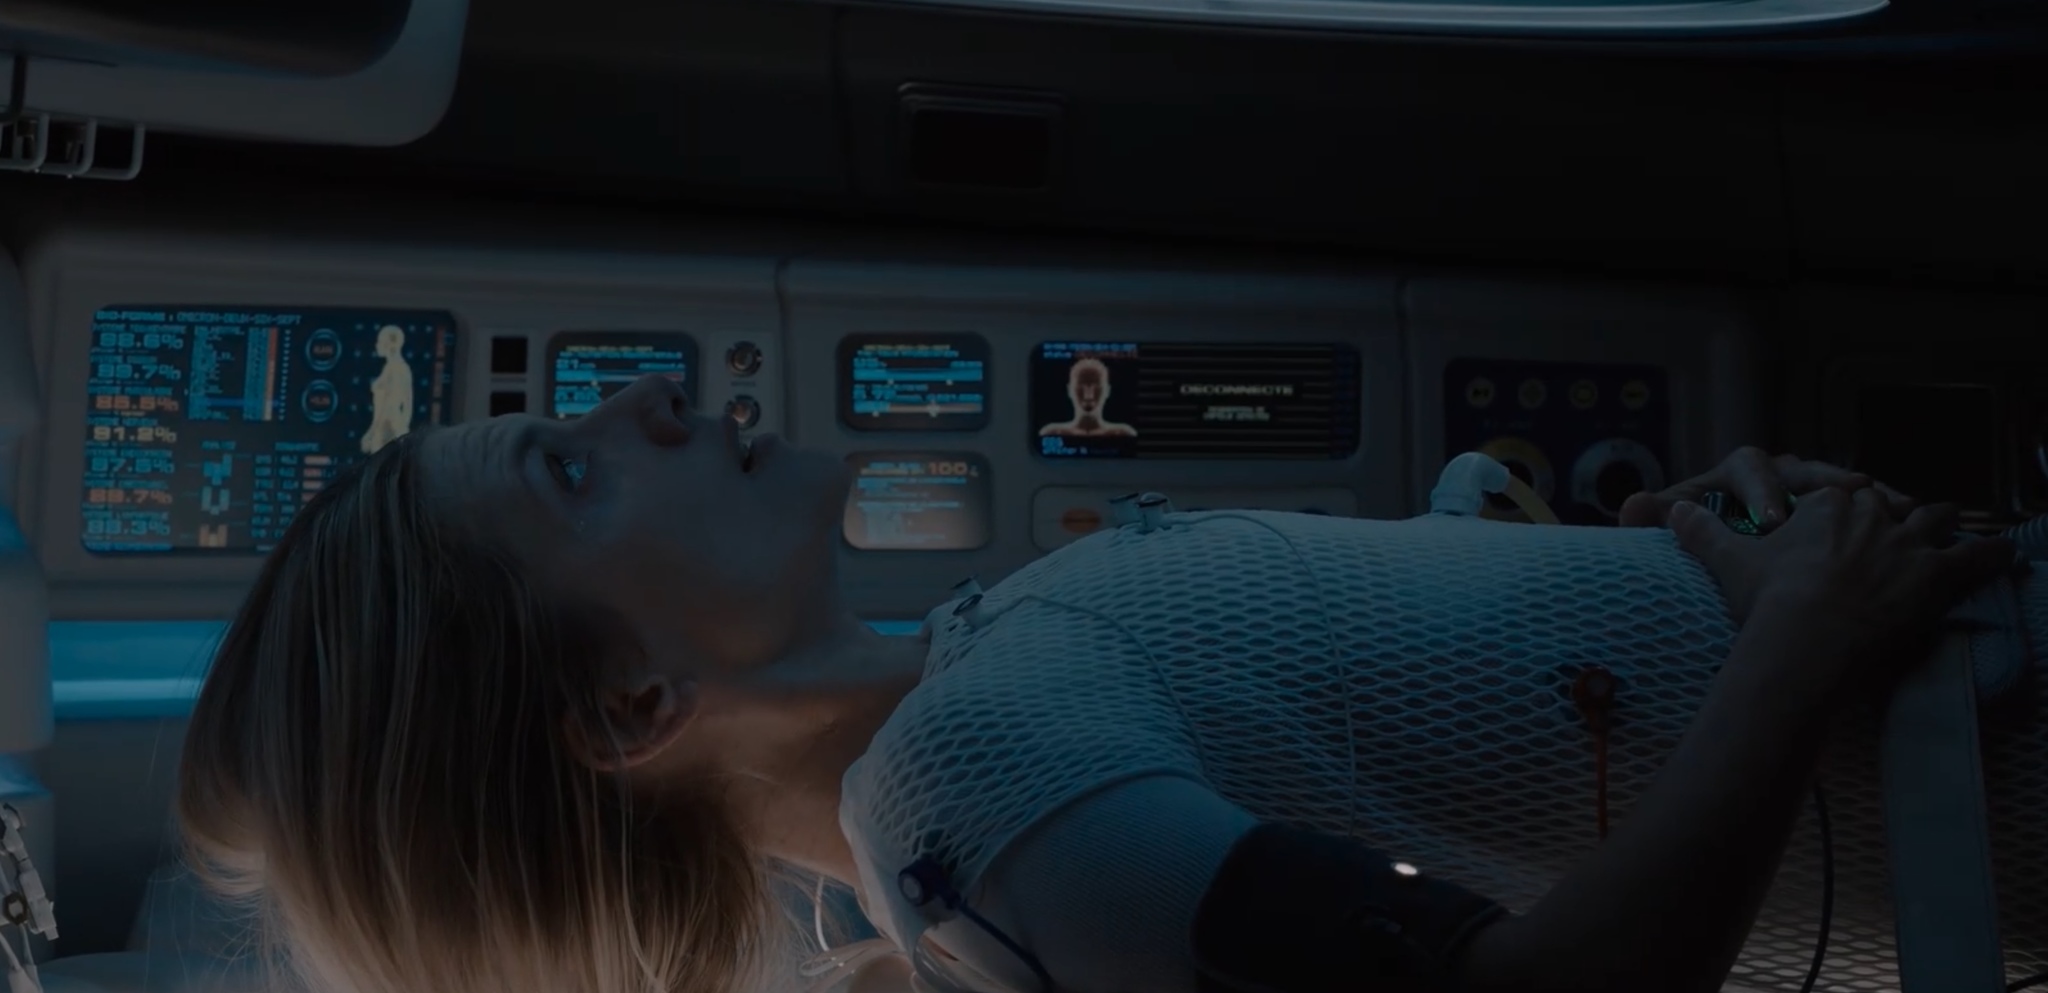 If you wake up and there is a cryocapsule around you - My, Movies, Netflix, Fantasy, Thriller, Psychological thriller, Drama, Actors and actresses, New films, , Overview, Horror, Claustrophobia, Streaming Service, Video, Longpost, Spoiler